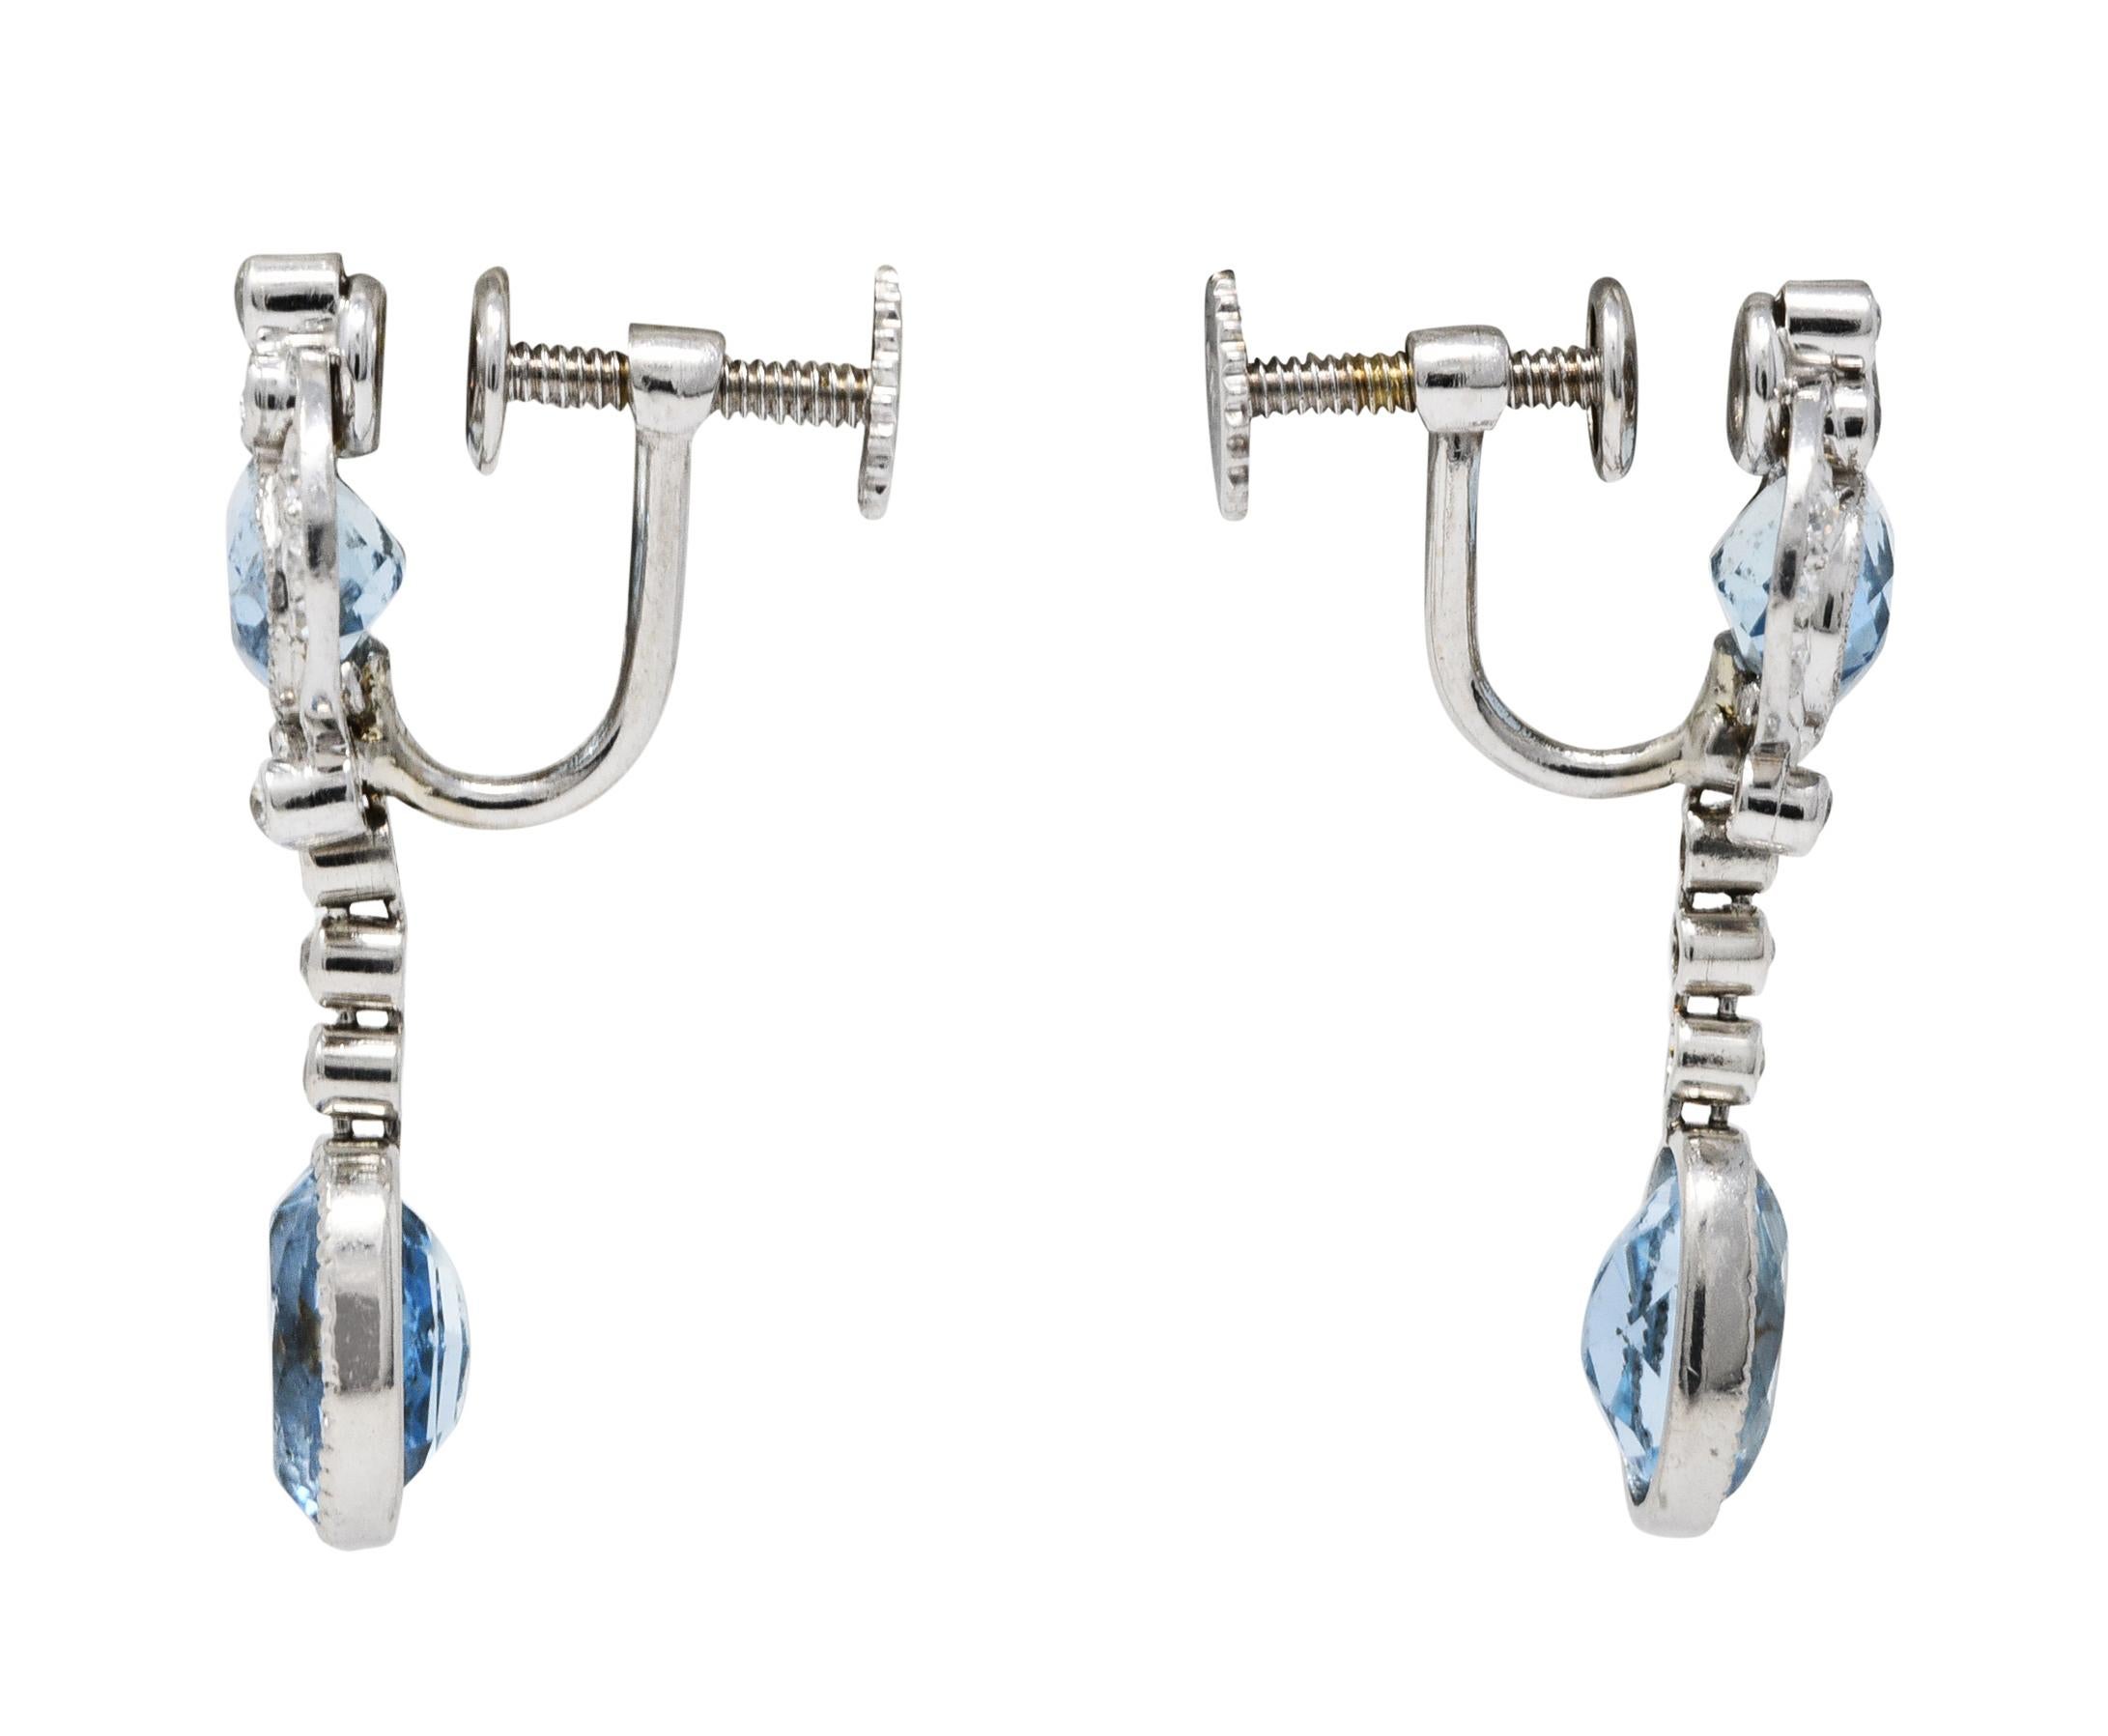 Screwback earrings are designed with an ornately scrolling surmount suspending an articulated drop

Featuring oval cut aquamarines weighing in total approximately 5.00 carats

Bezel set, well matched, medium light greenish blue in color

Accented